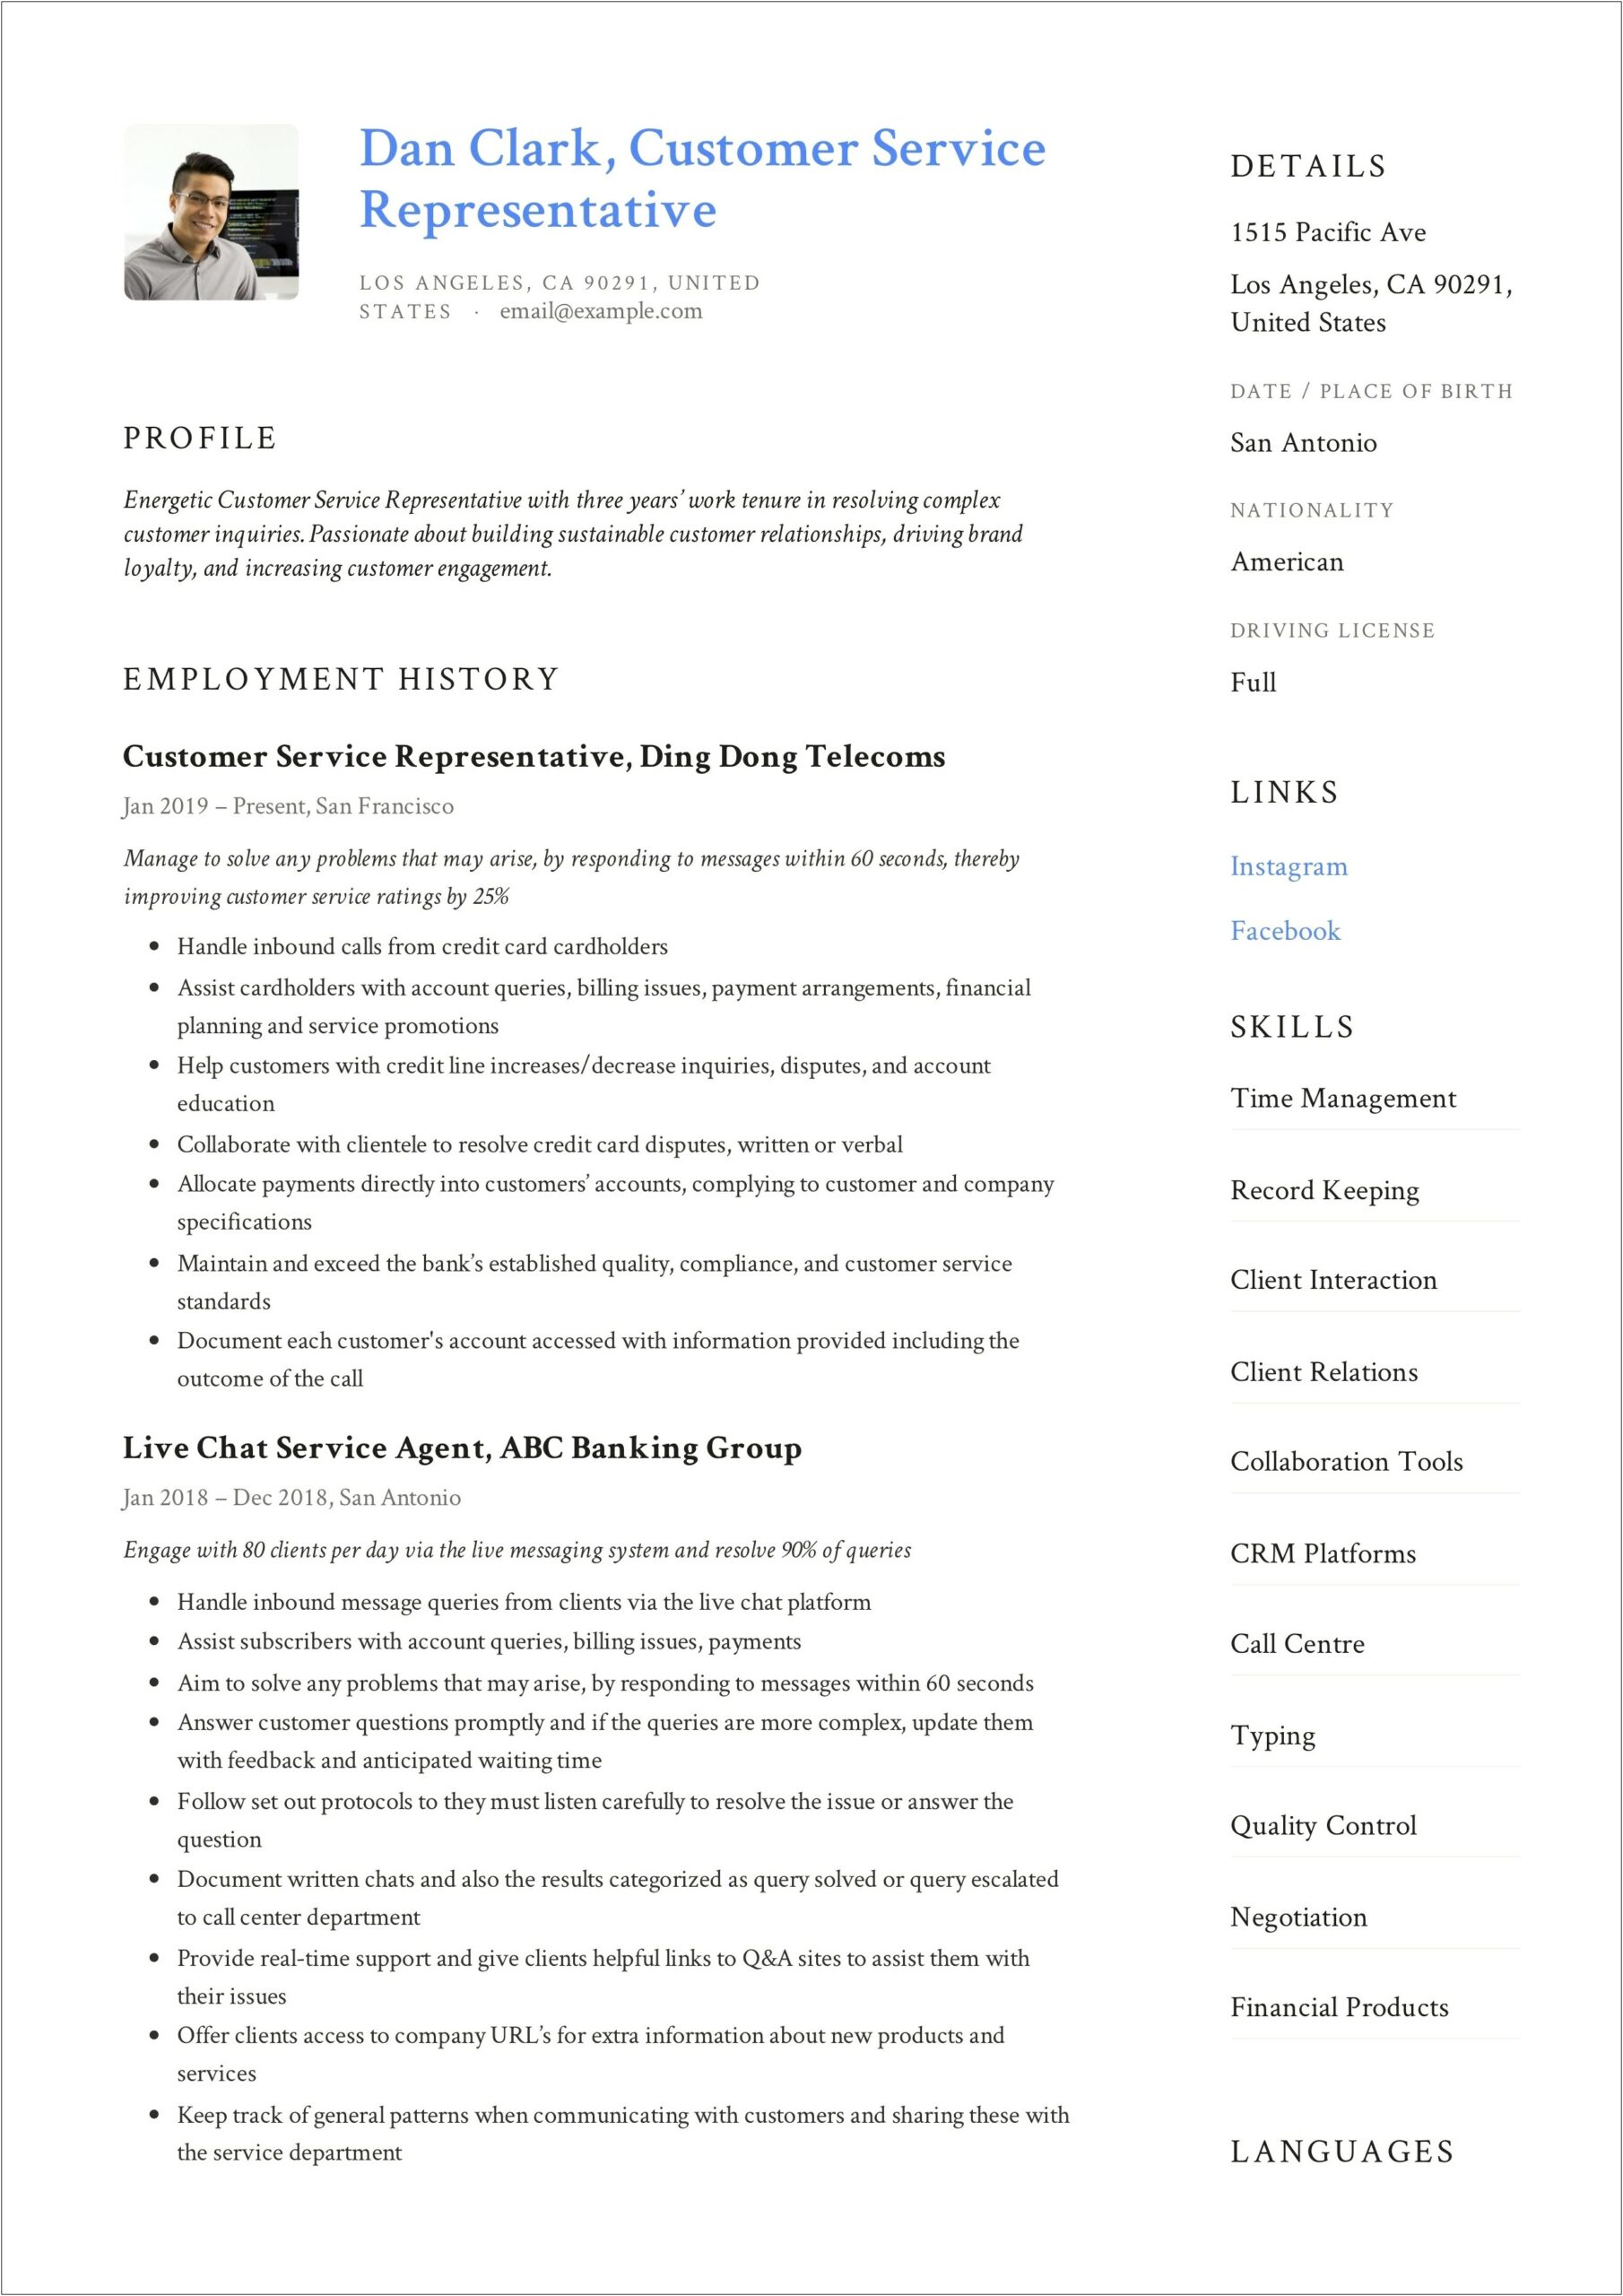 Resume Objective For Guest Service Agent